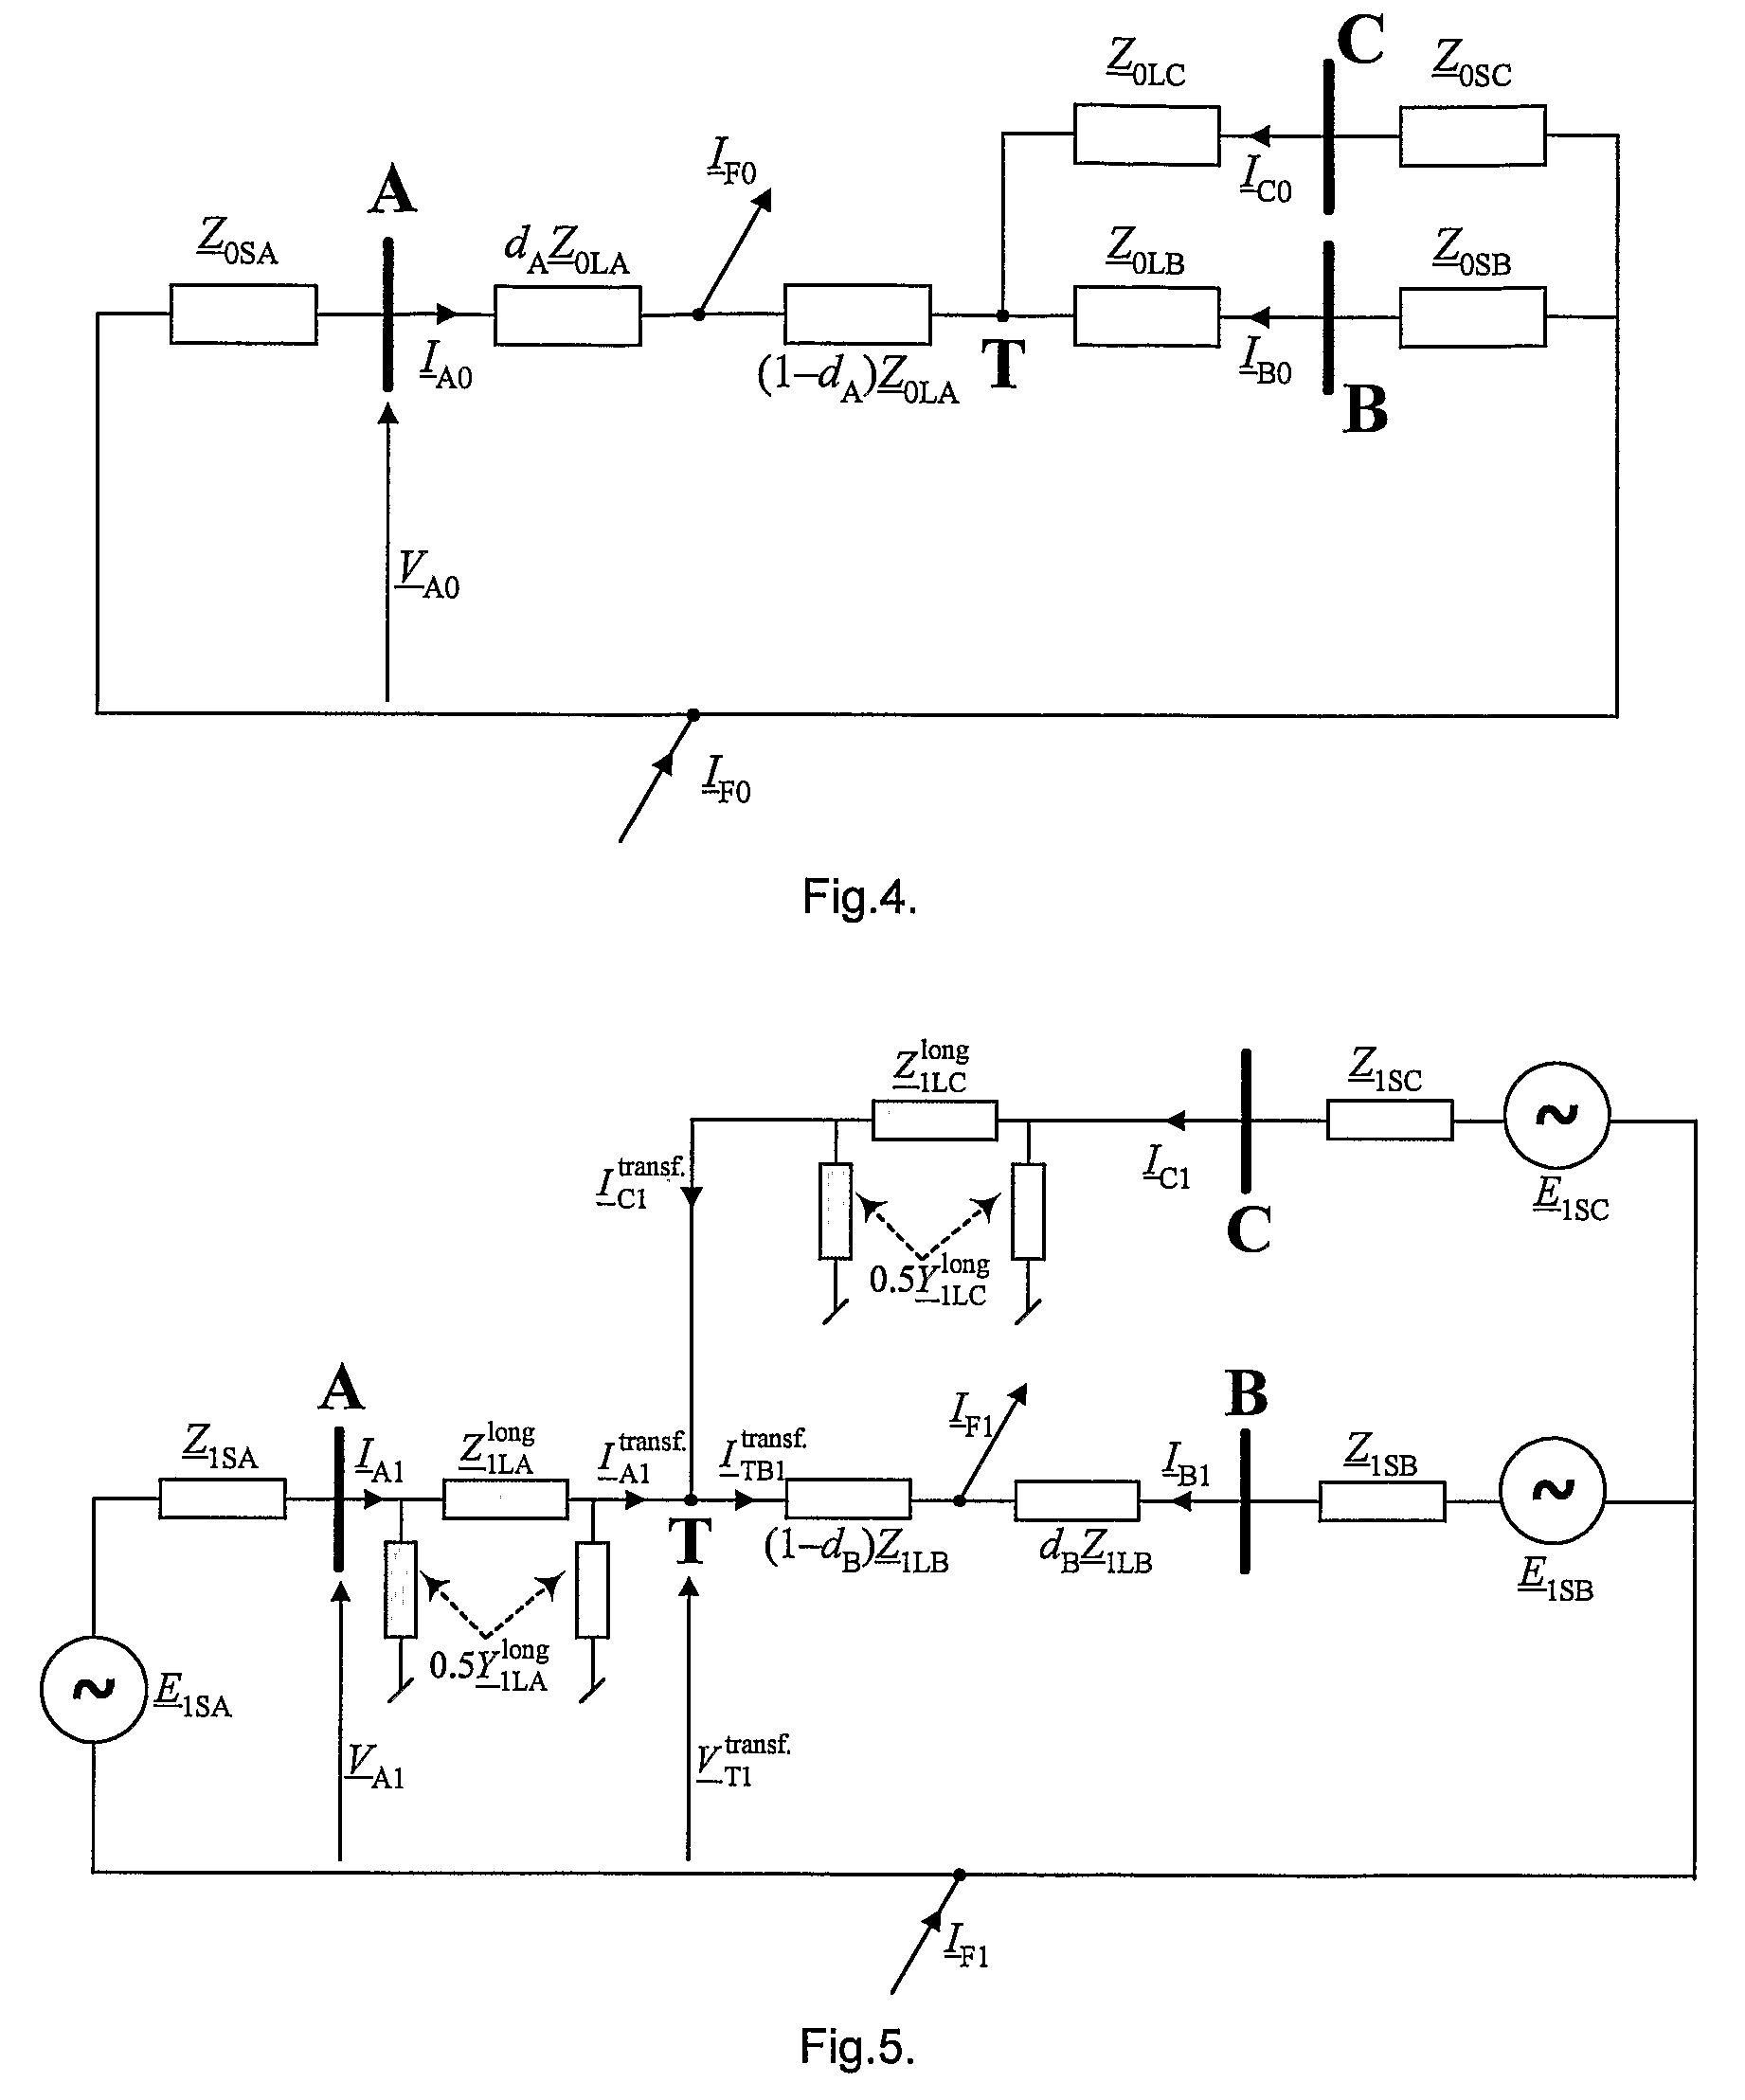 Method for fault location in electric power lines